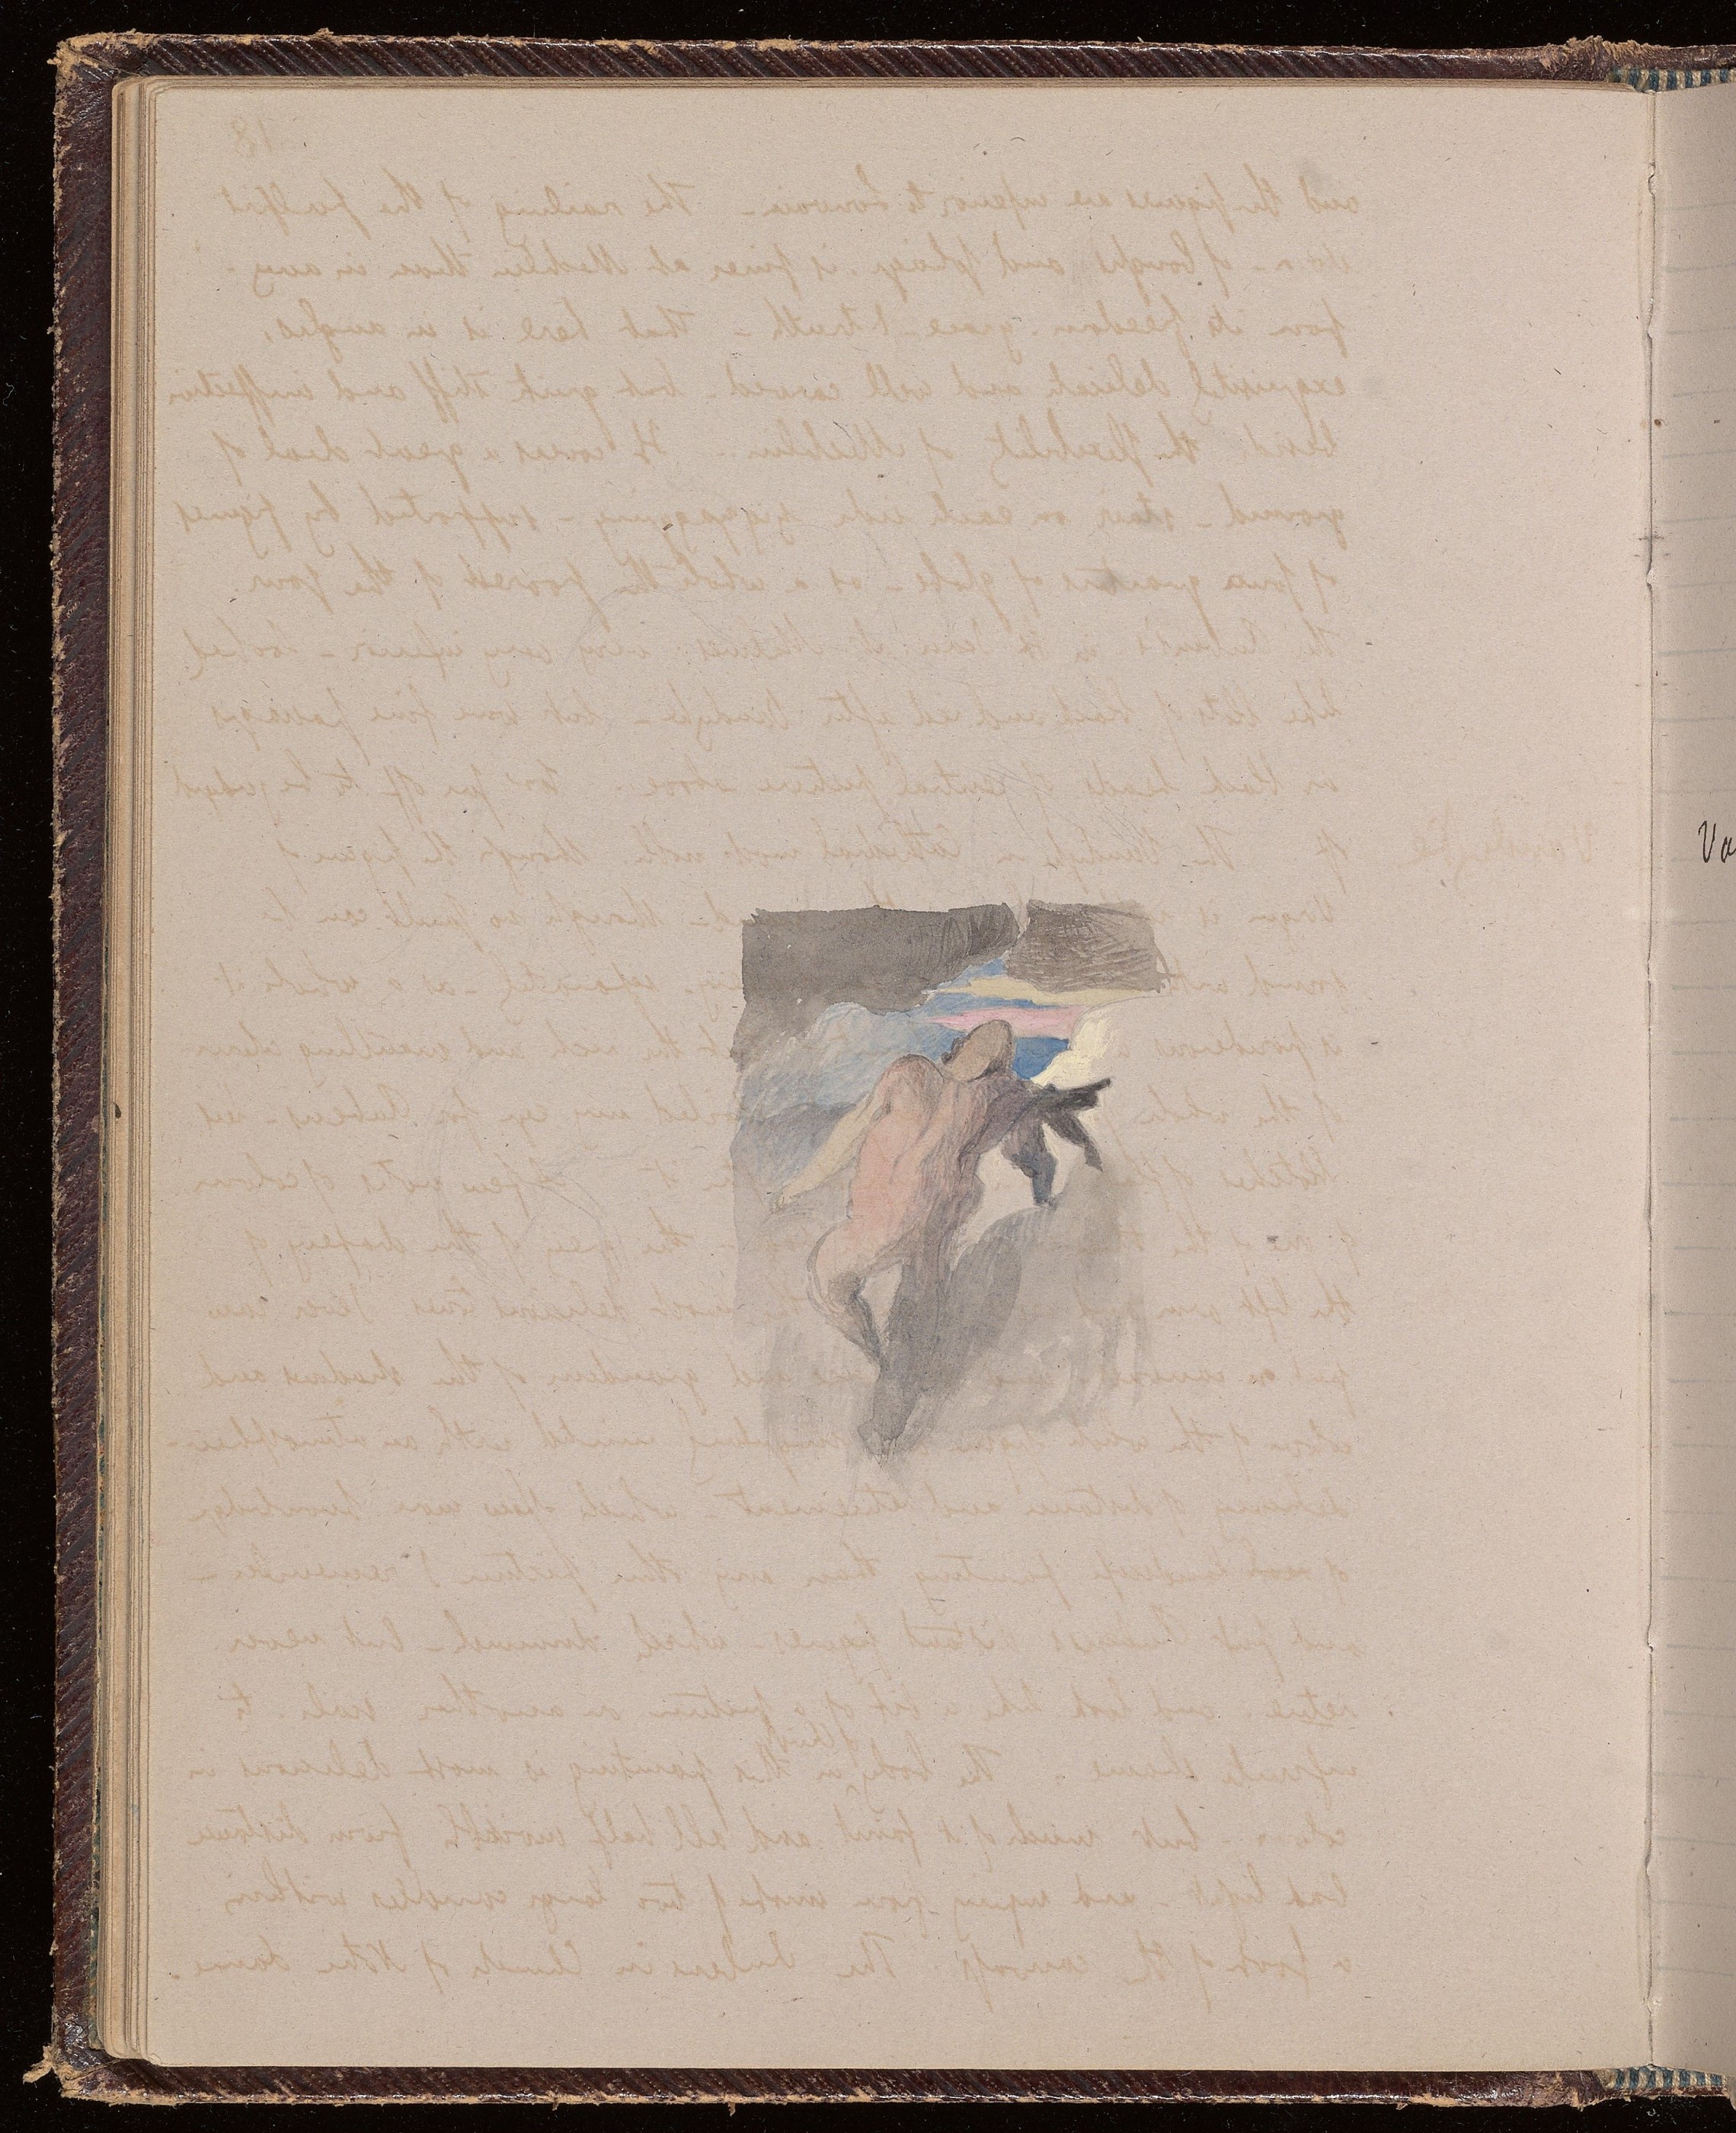 <p>Manuscript notebook with watercolors, sketches, and drawings. Bound in purple full calf, May-September 1842. John Ruskin Collection. General Collection, Beinecke Rare Book and Manuscript Library, Yale University.</p>